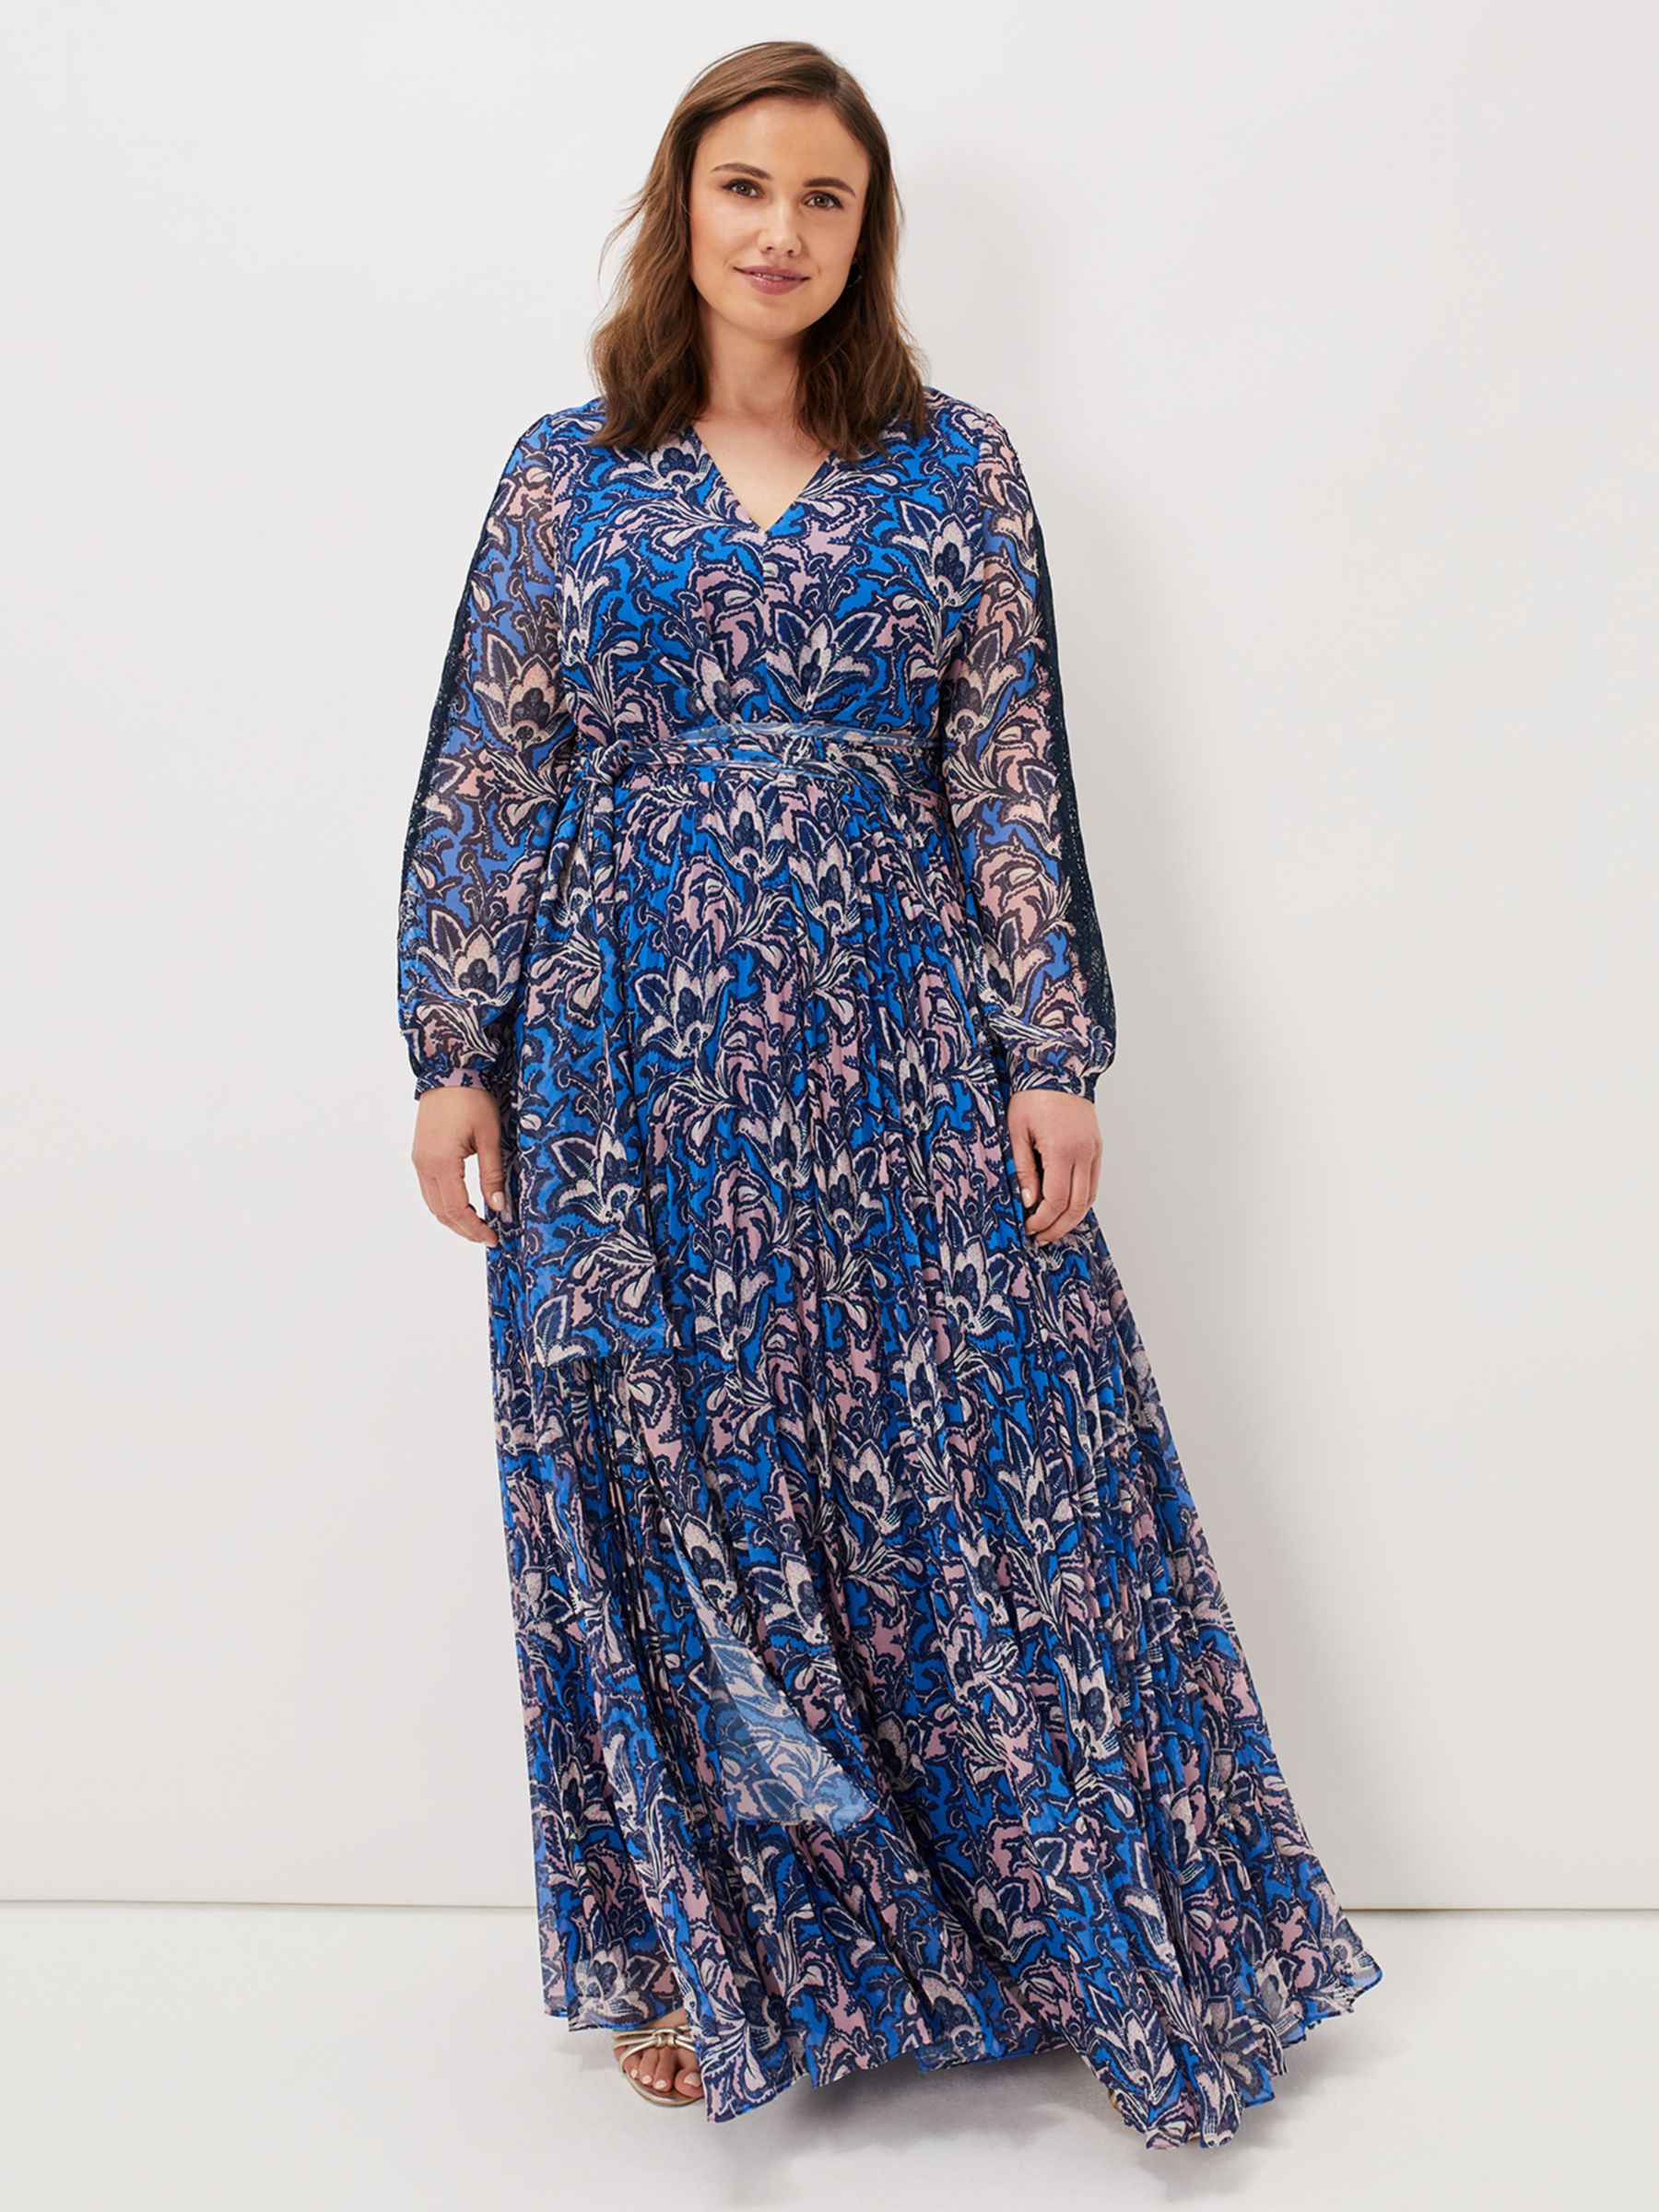 Phase Eight Claudia Floral Maxi Dress, Blue/Multi, 6